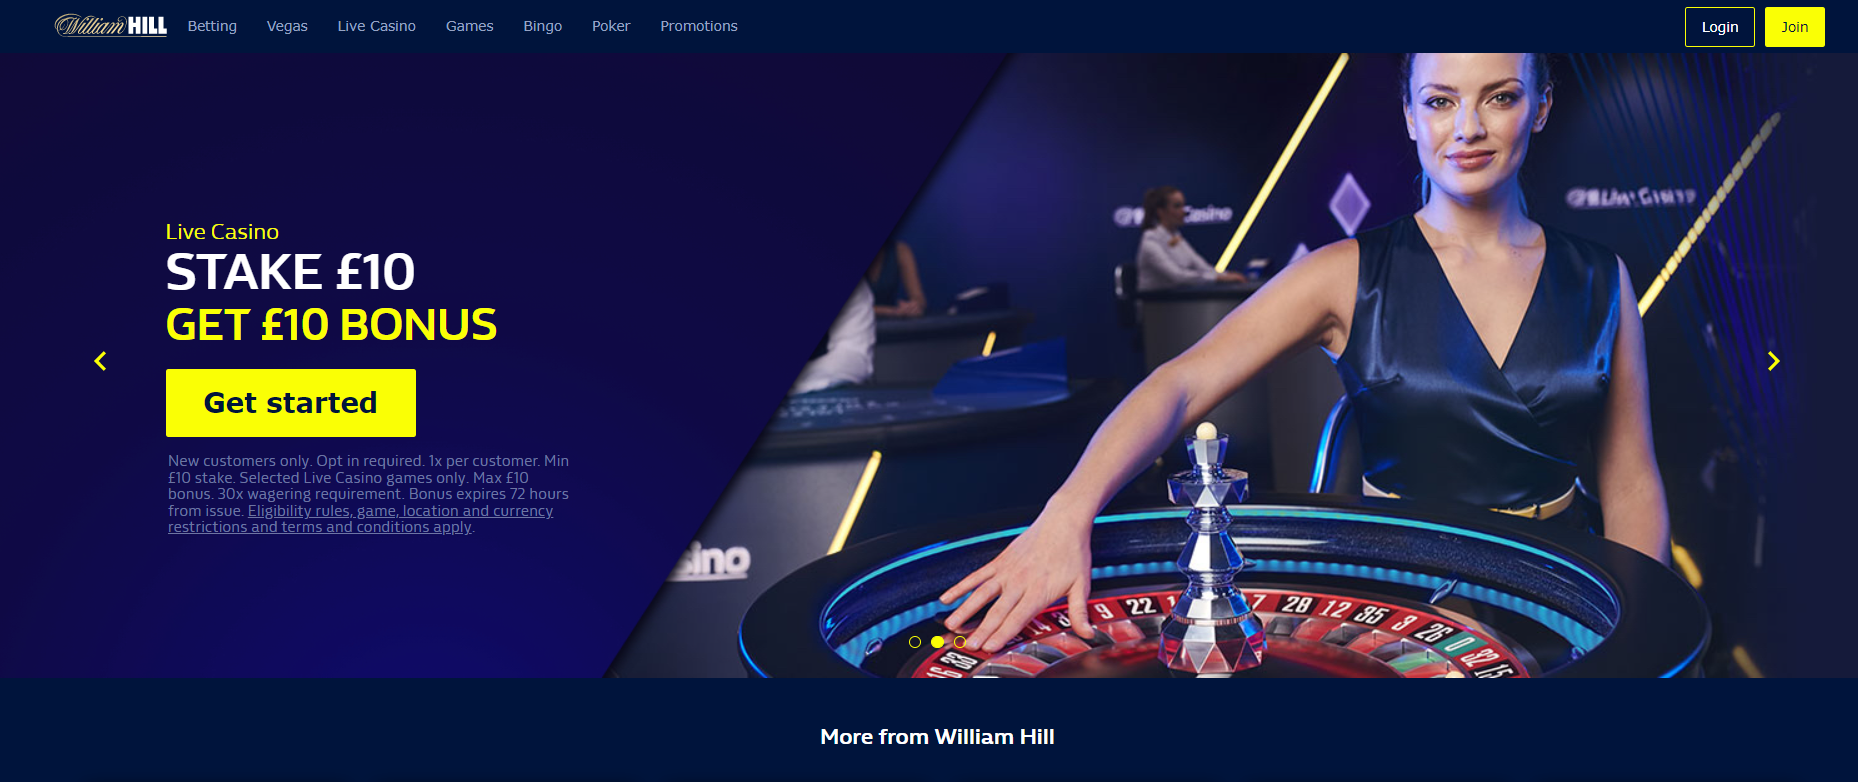 William Hill Reviews - Image 1